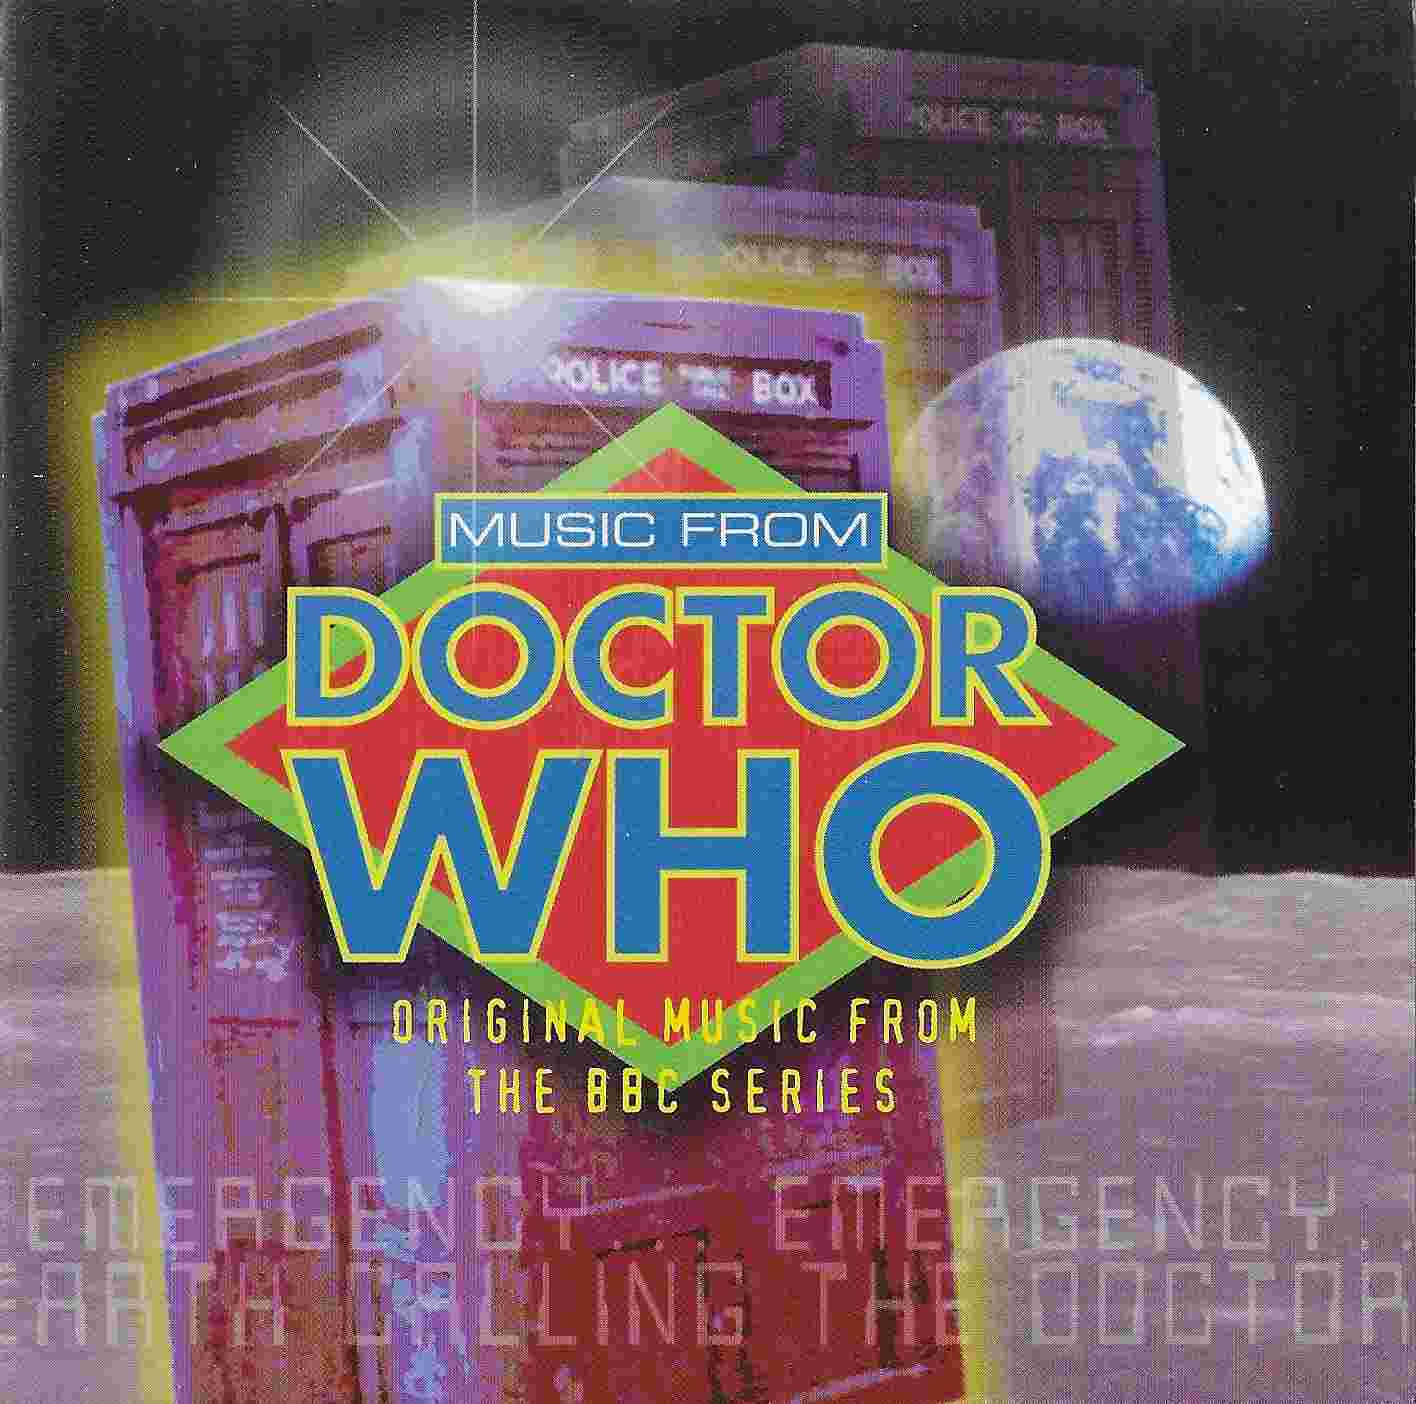 Picture of Doctor Who - Original music from the series by artist Various from the BBC cds - Records and Tapes library